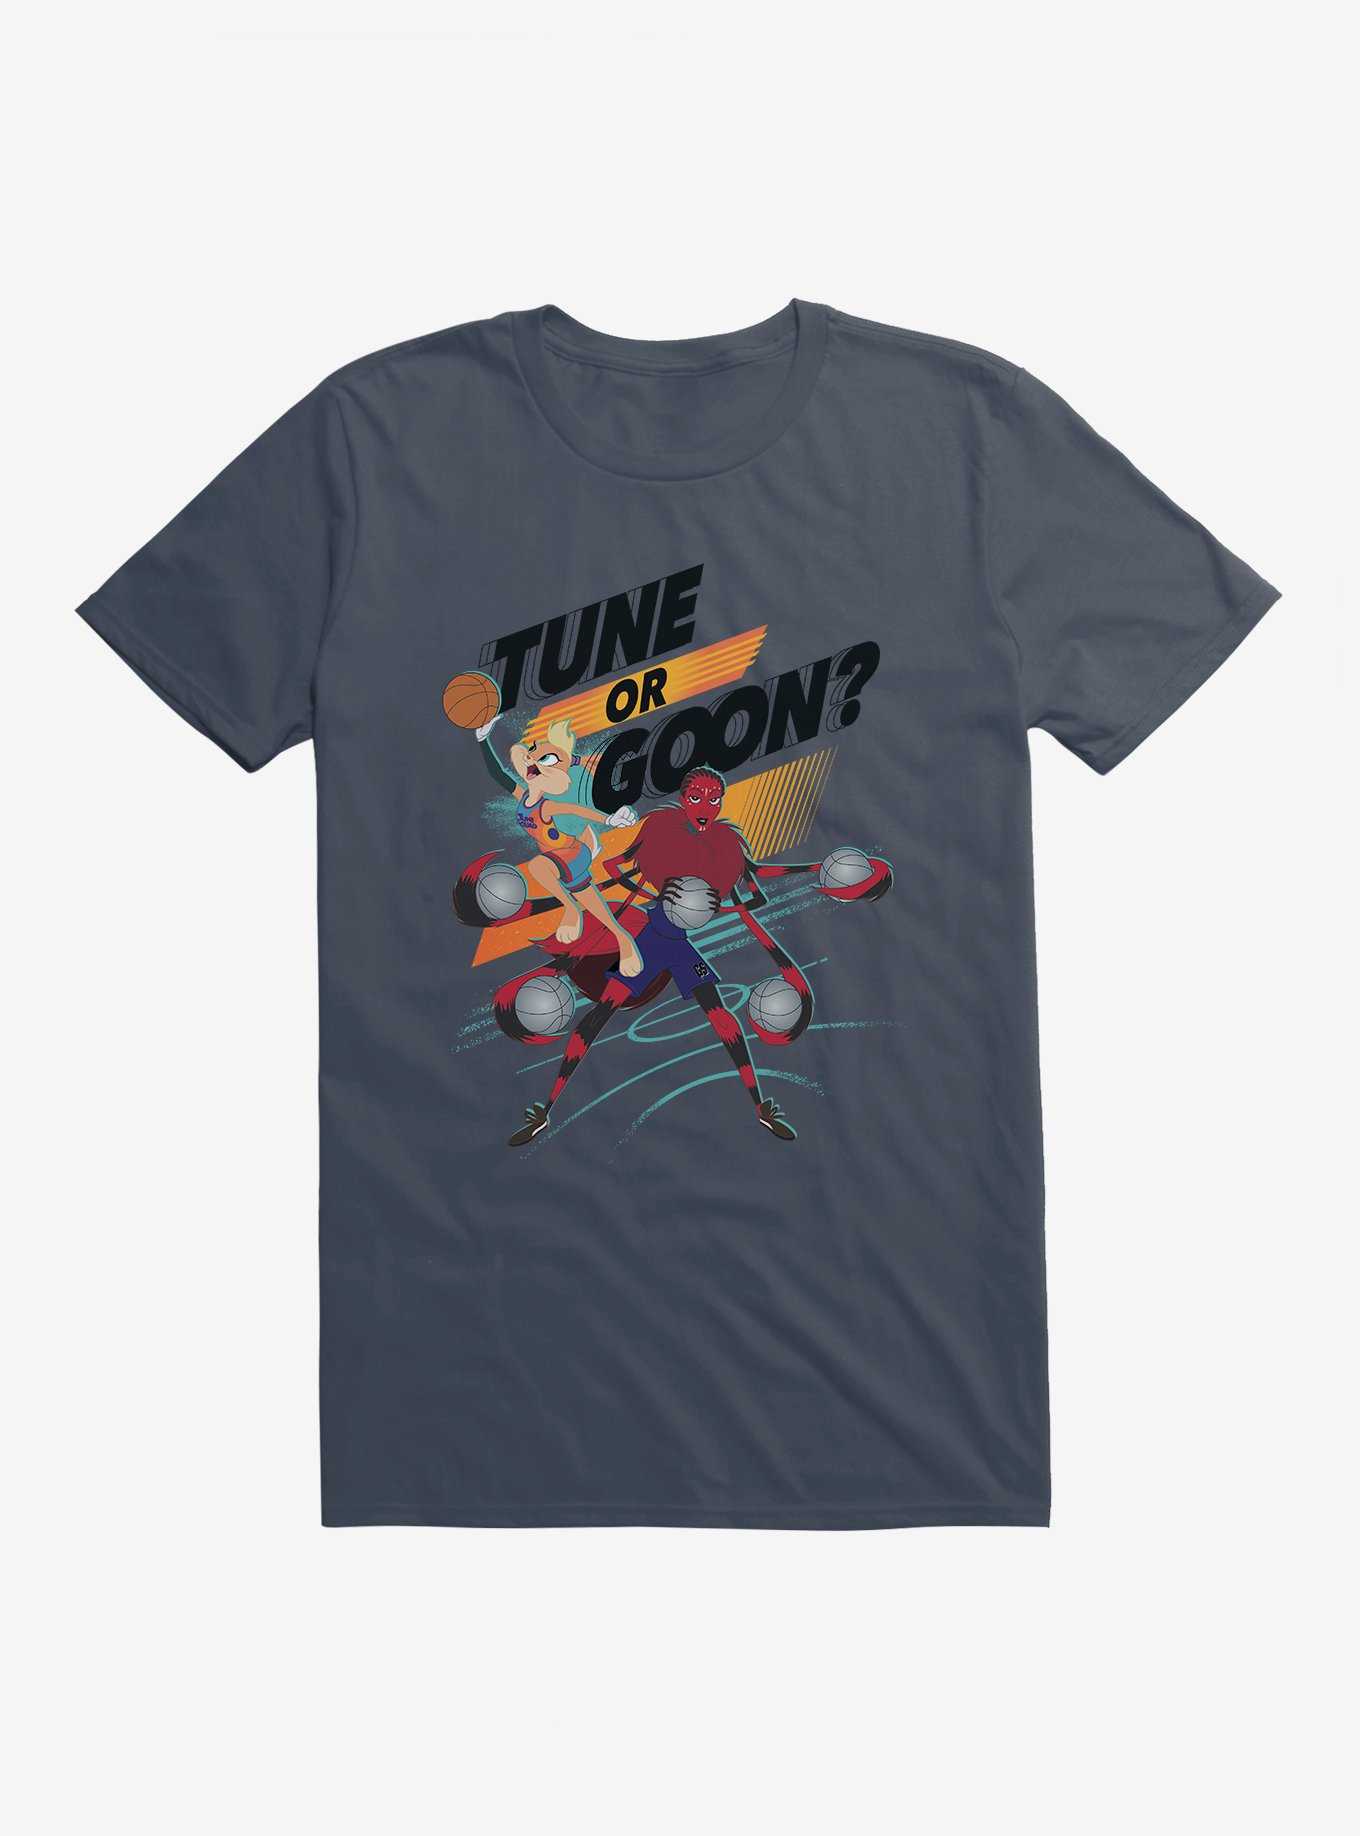 Space Jam: A New Legacy Tune Or Goon? Logo T-Shirt, , hi-res